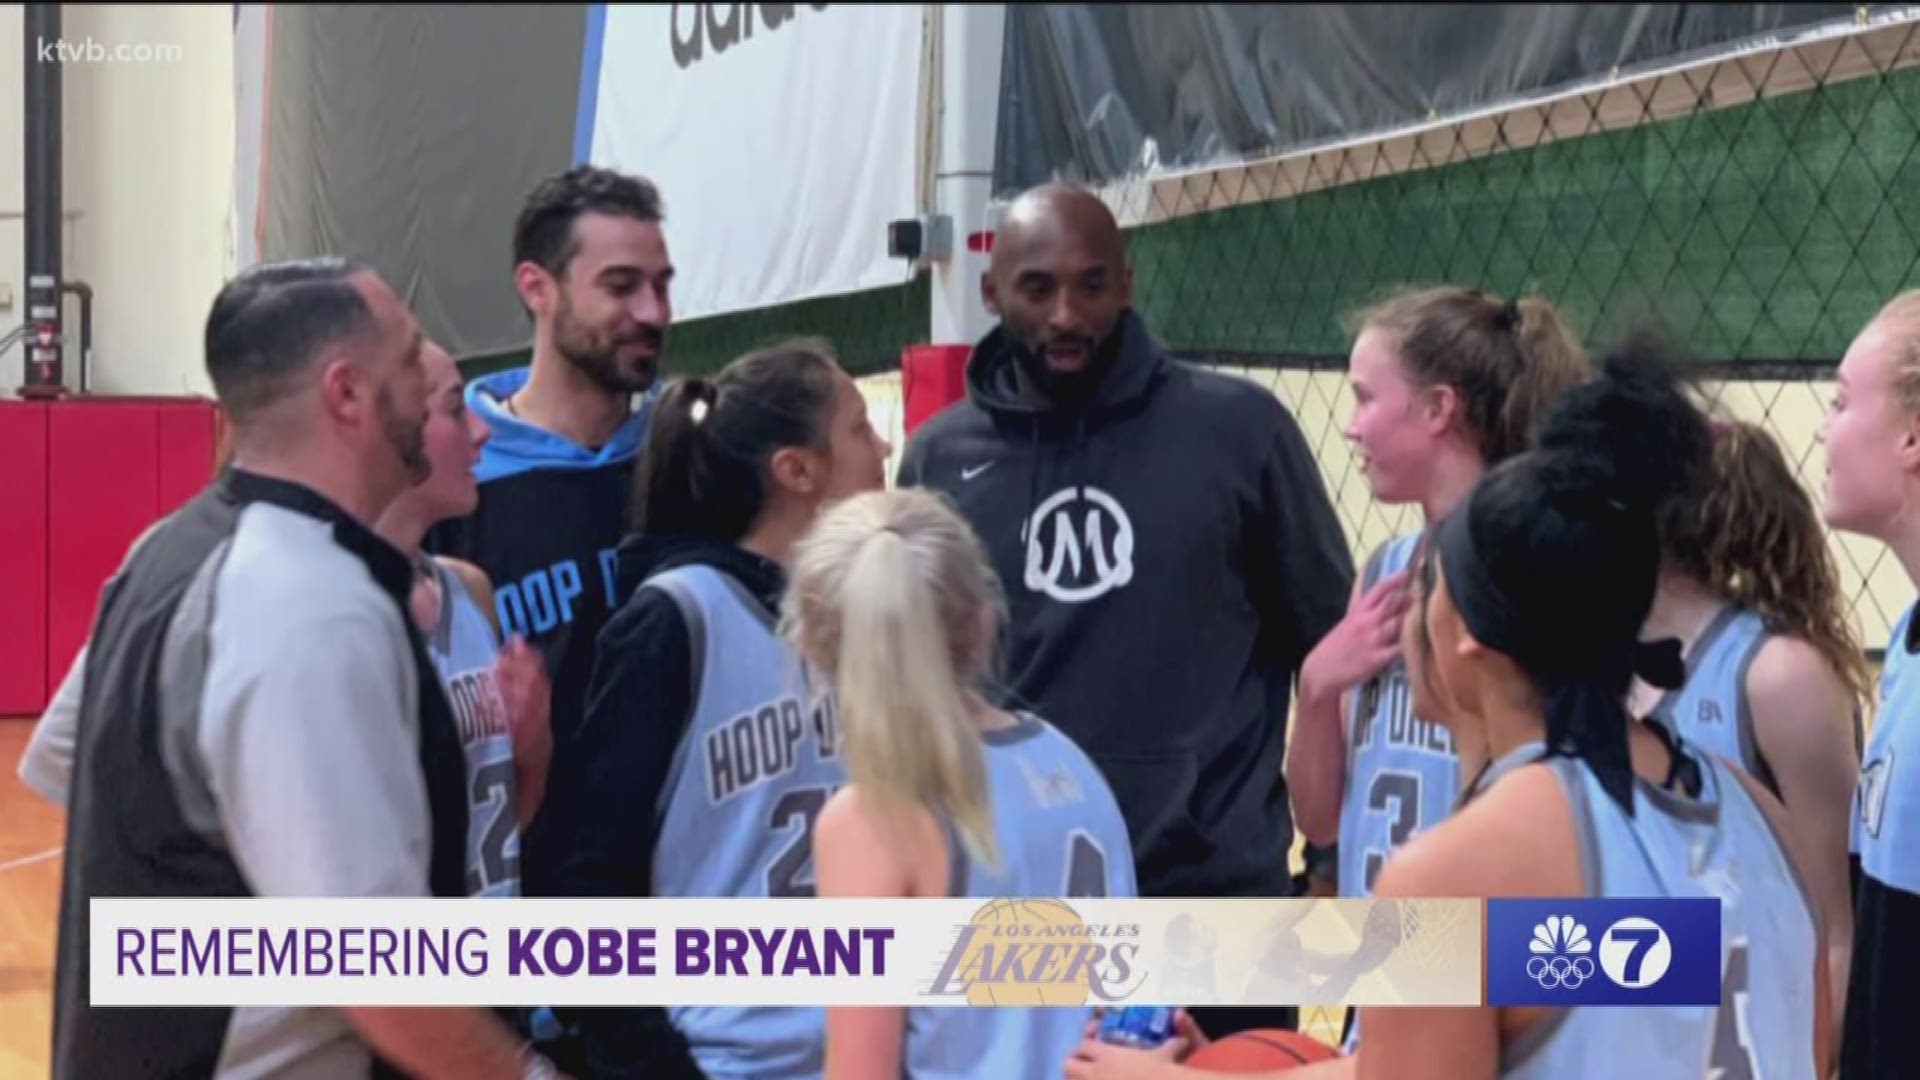 Jay Tust and Will Hall caught up with the Idaho Hoop Dreams, who were set to meet Kobe Bryant on the day of his death.